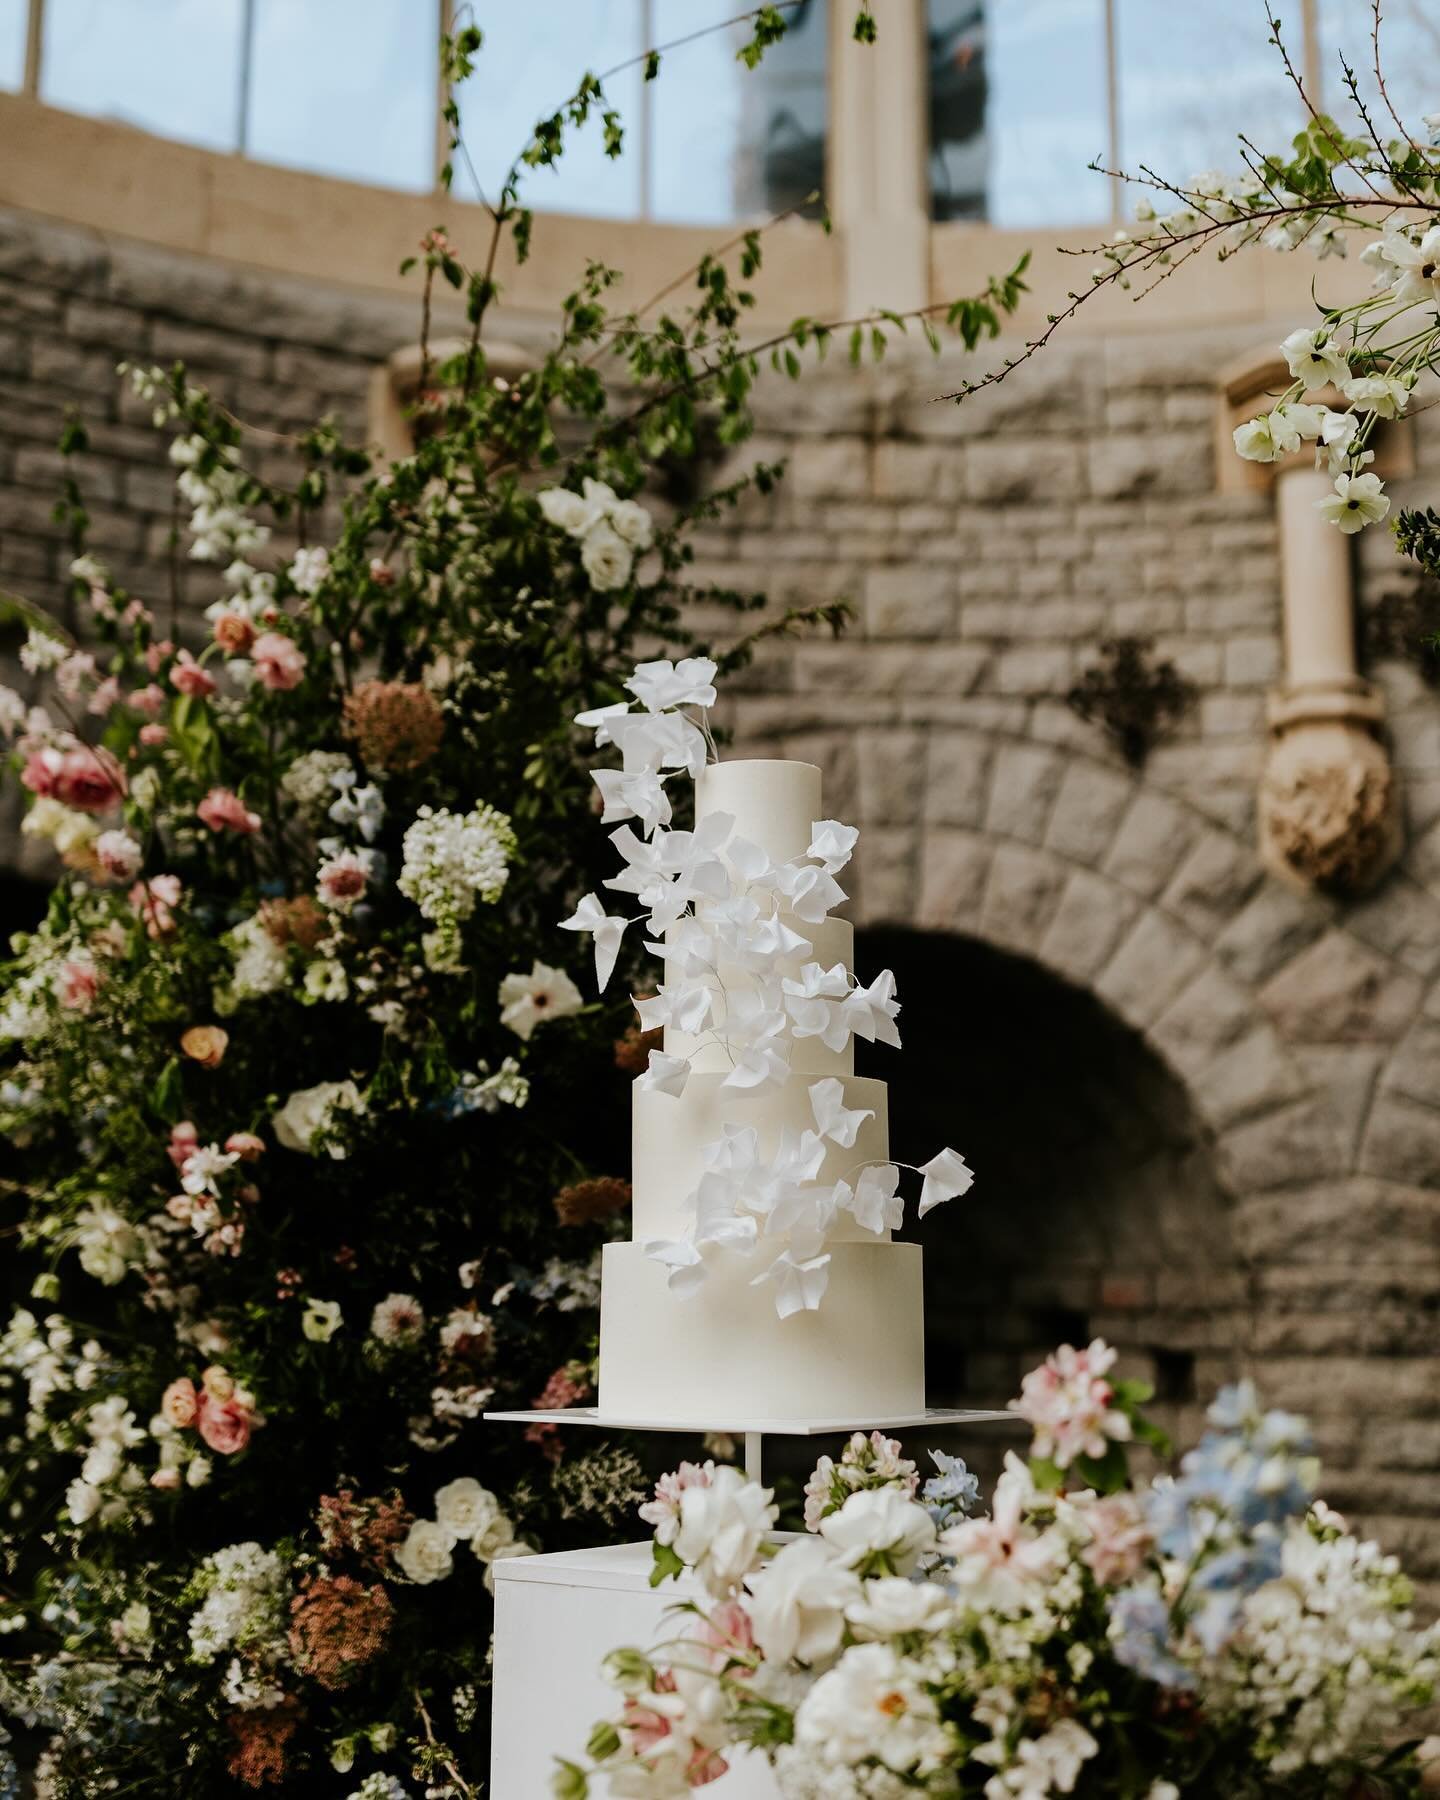 The most perfect &amp; romantic pastel colour palette&hellip;

Lead florist and stylist @onesplendidday
Photographer @sophiecollinsphotography_
Videographer @poshbearuk
Cakes @thegingerbearbakery
Venue @tortworth_court_weddings
Dresses @highsocietybr